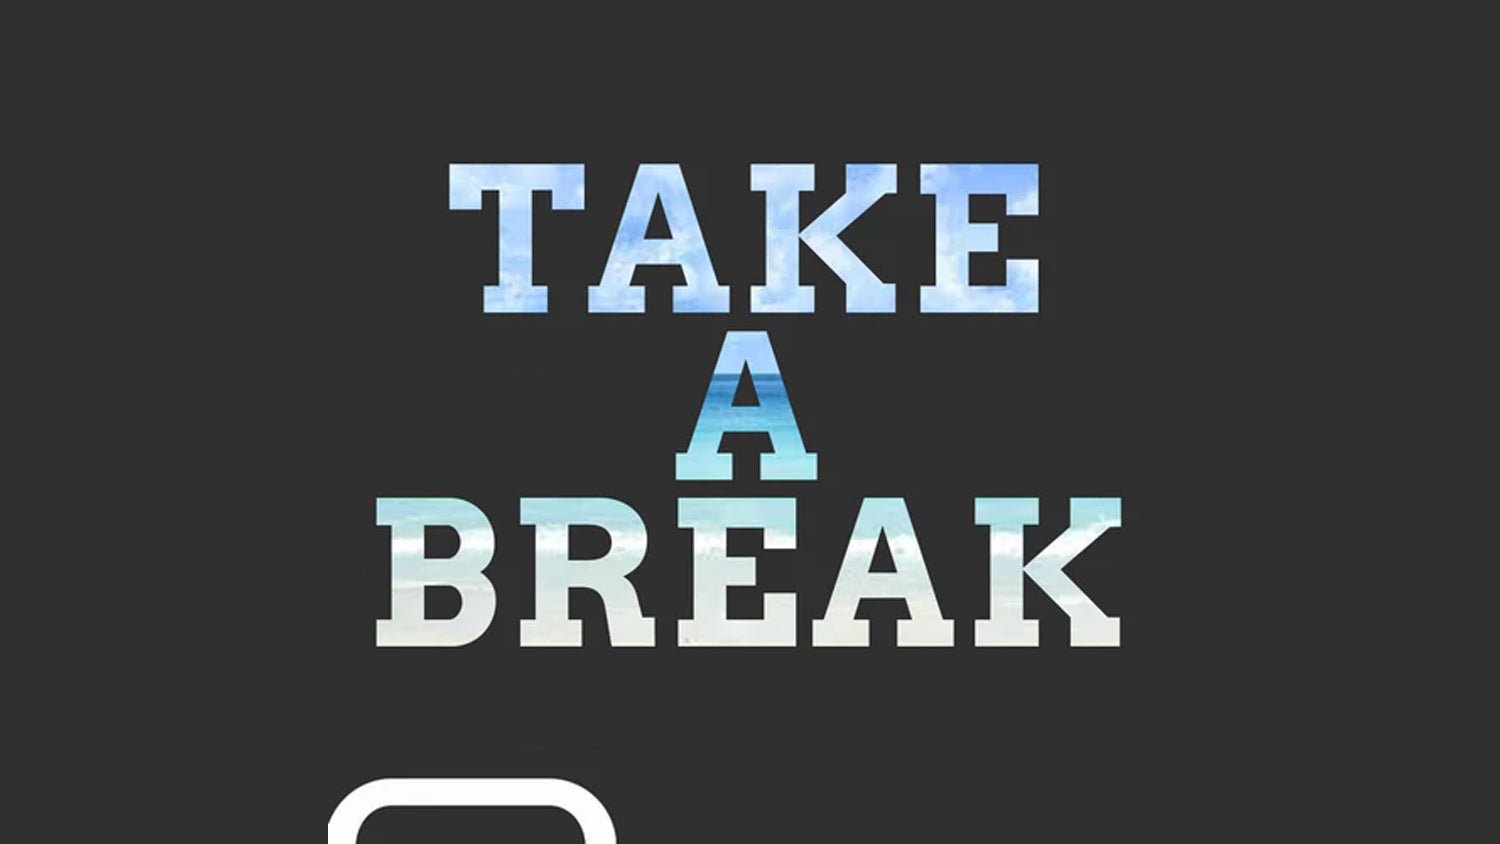 The Lighthouse Club - Take a Break August - TF Tools Ltd